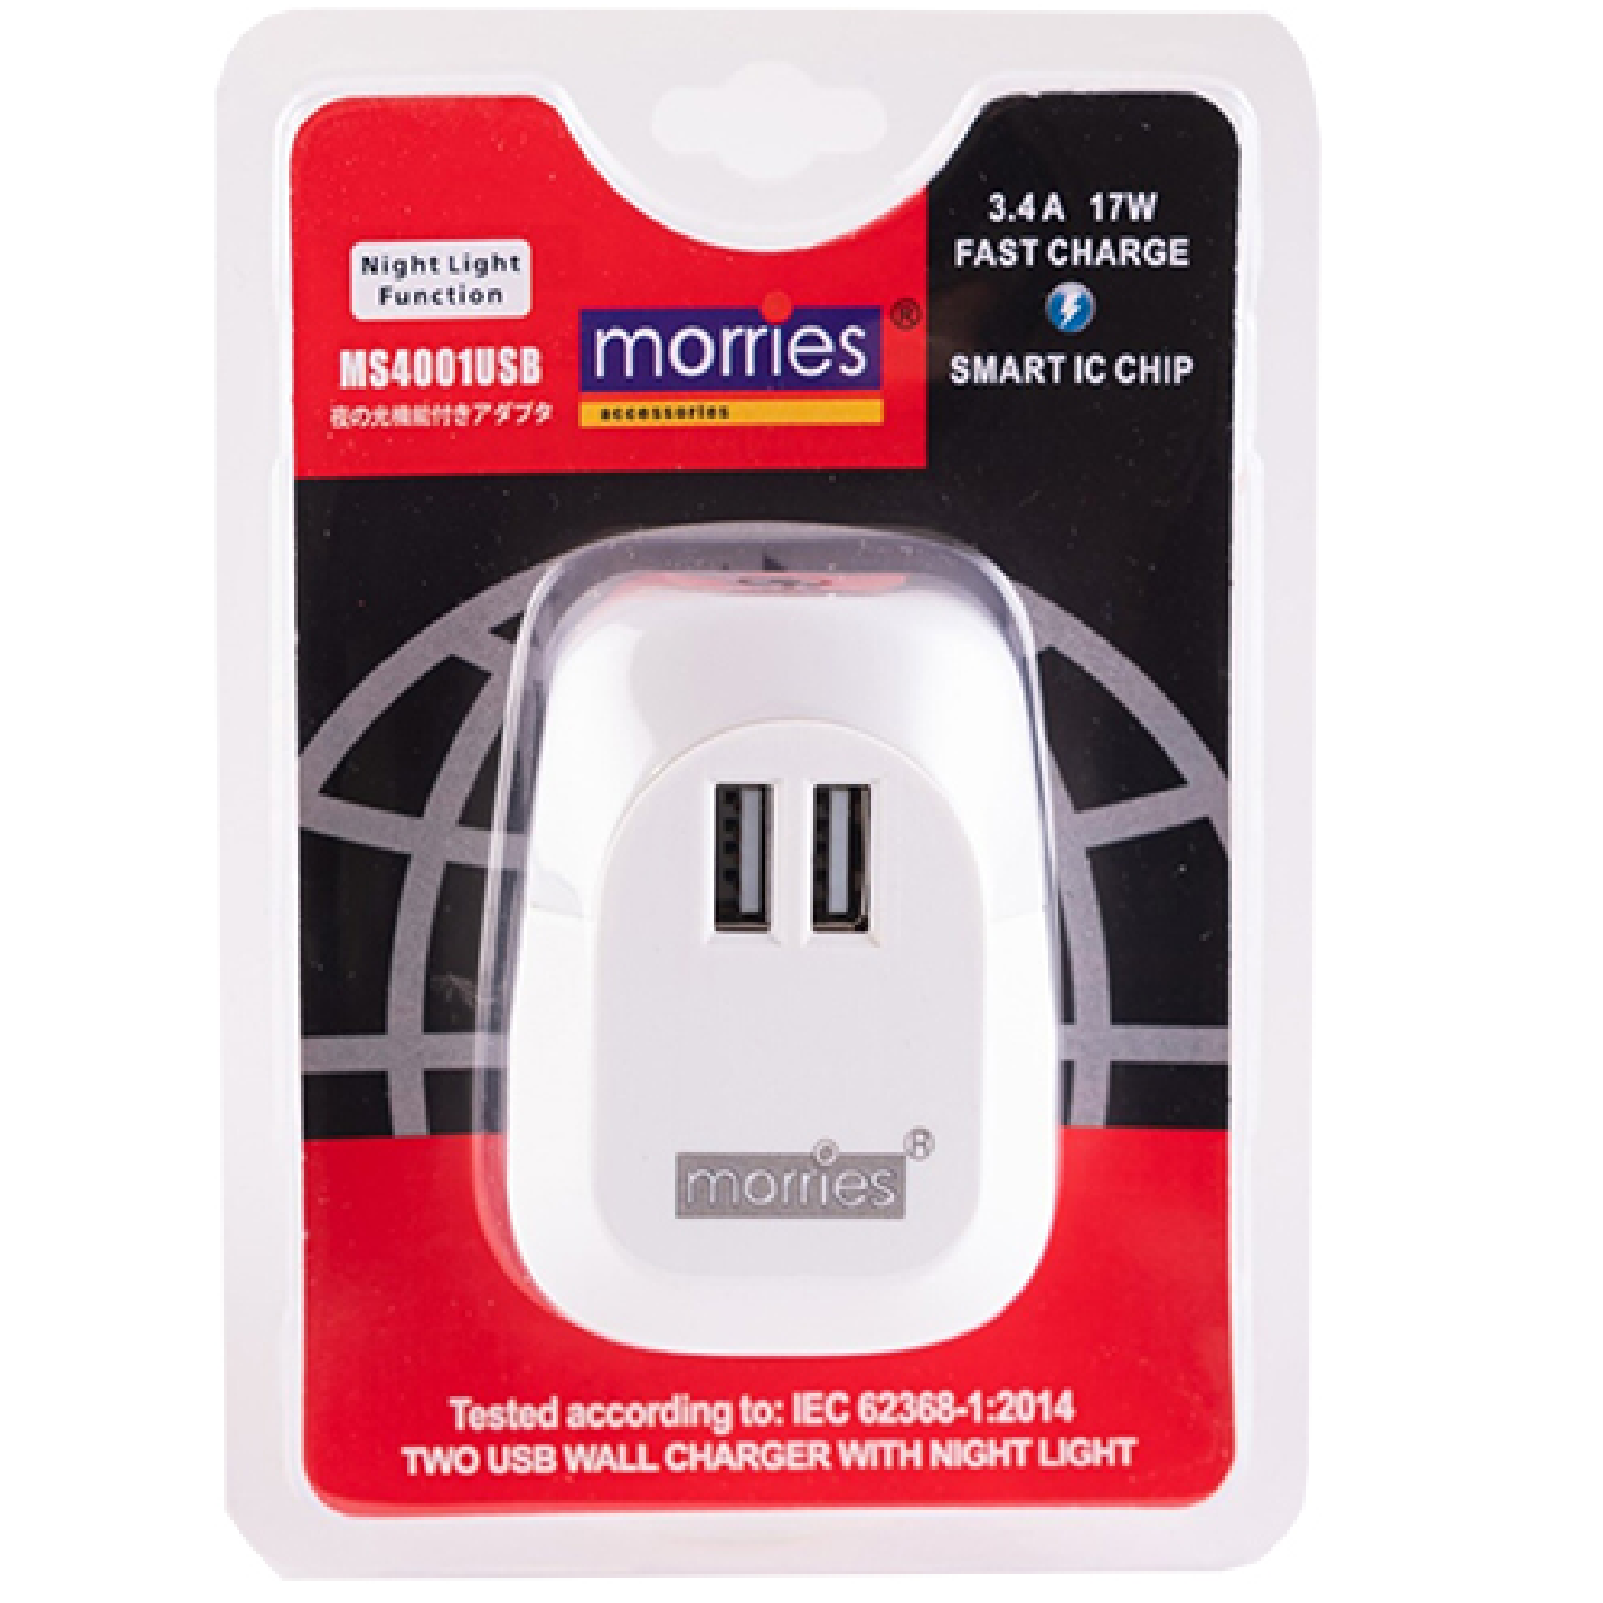 Morries 3.4A USB (Smart IC) ADAPTOR With NIGHT LIGHT Function MS4001USB